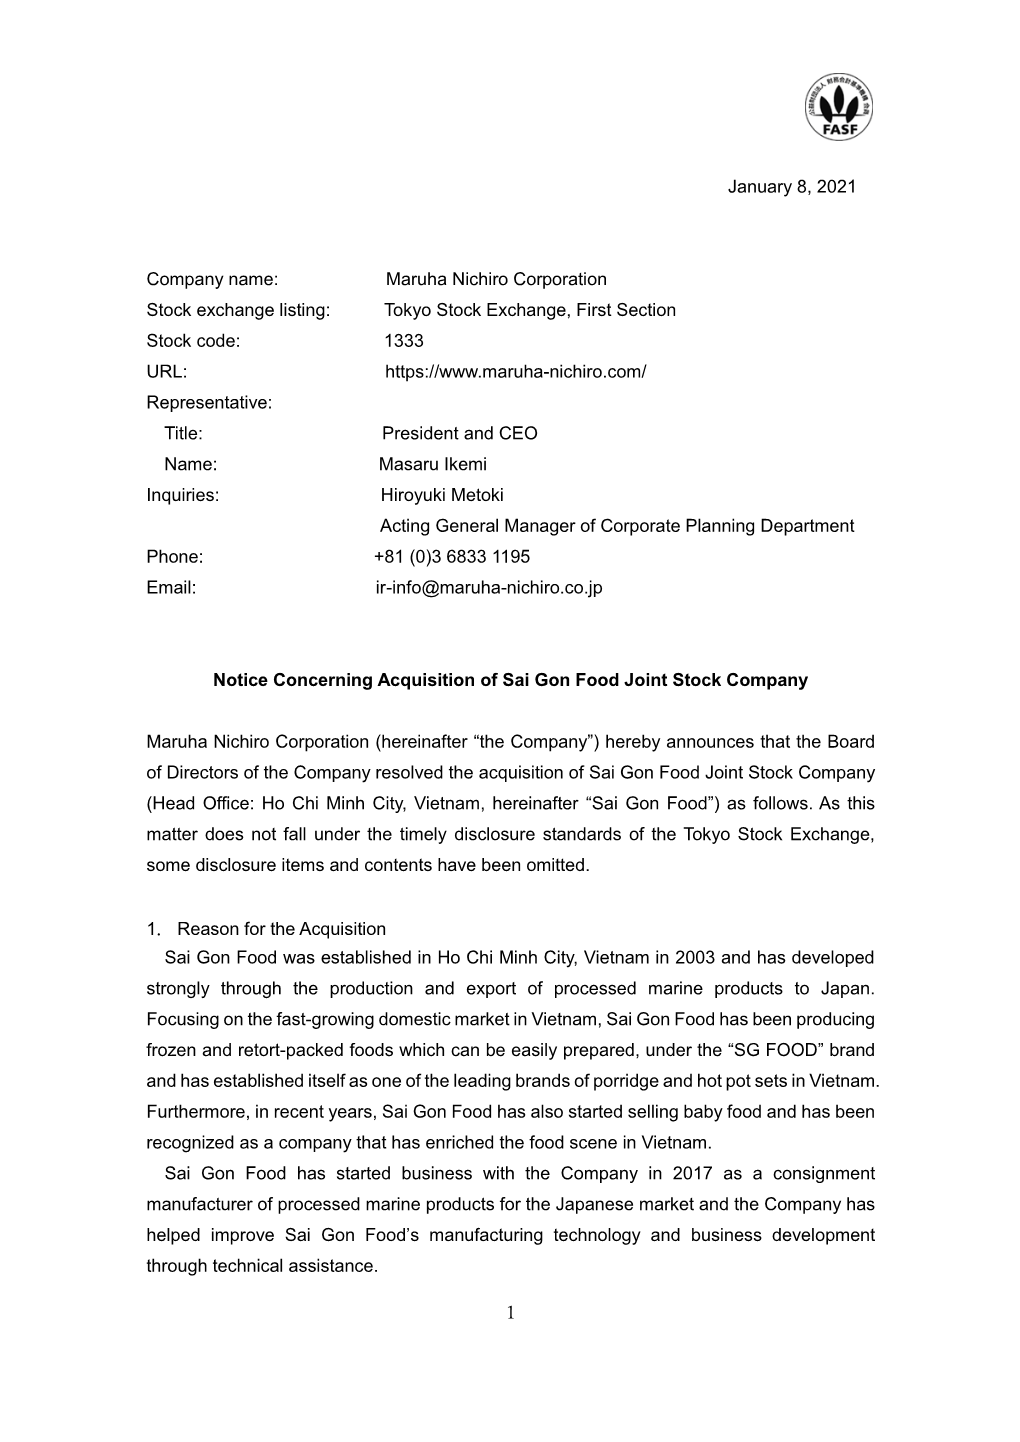 Notice Concerning Acquisition of Sai Gon Food Joint Stock Company